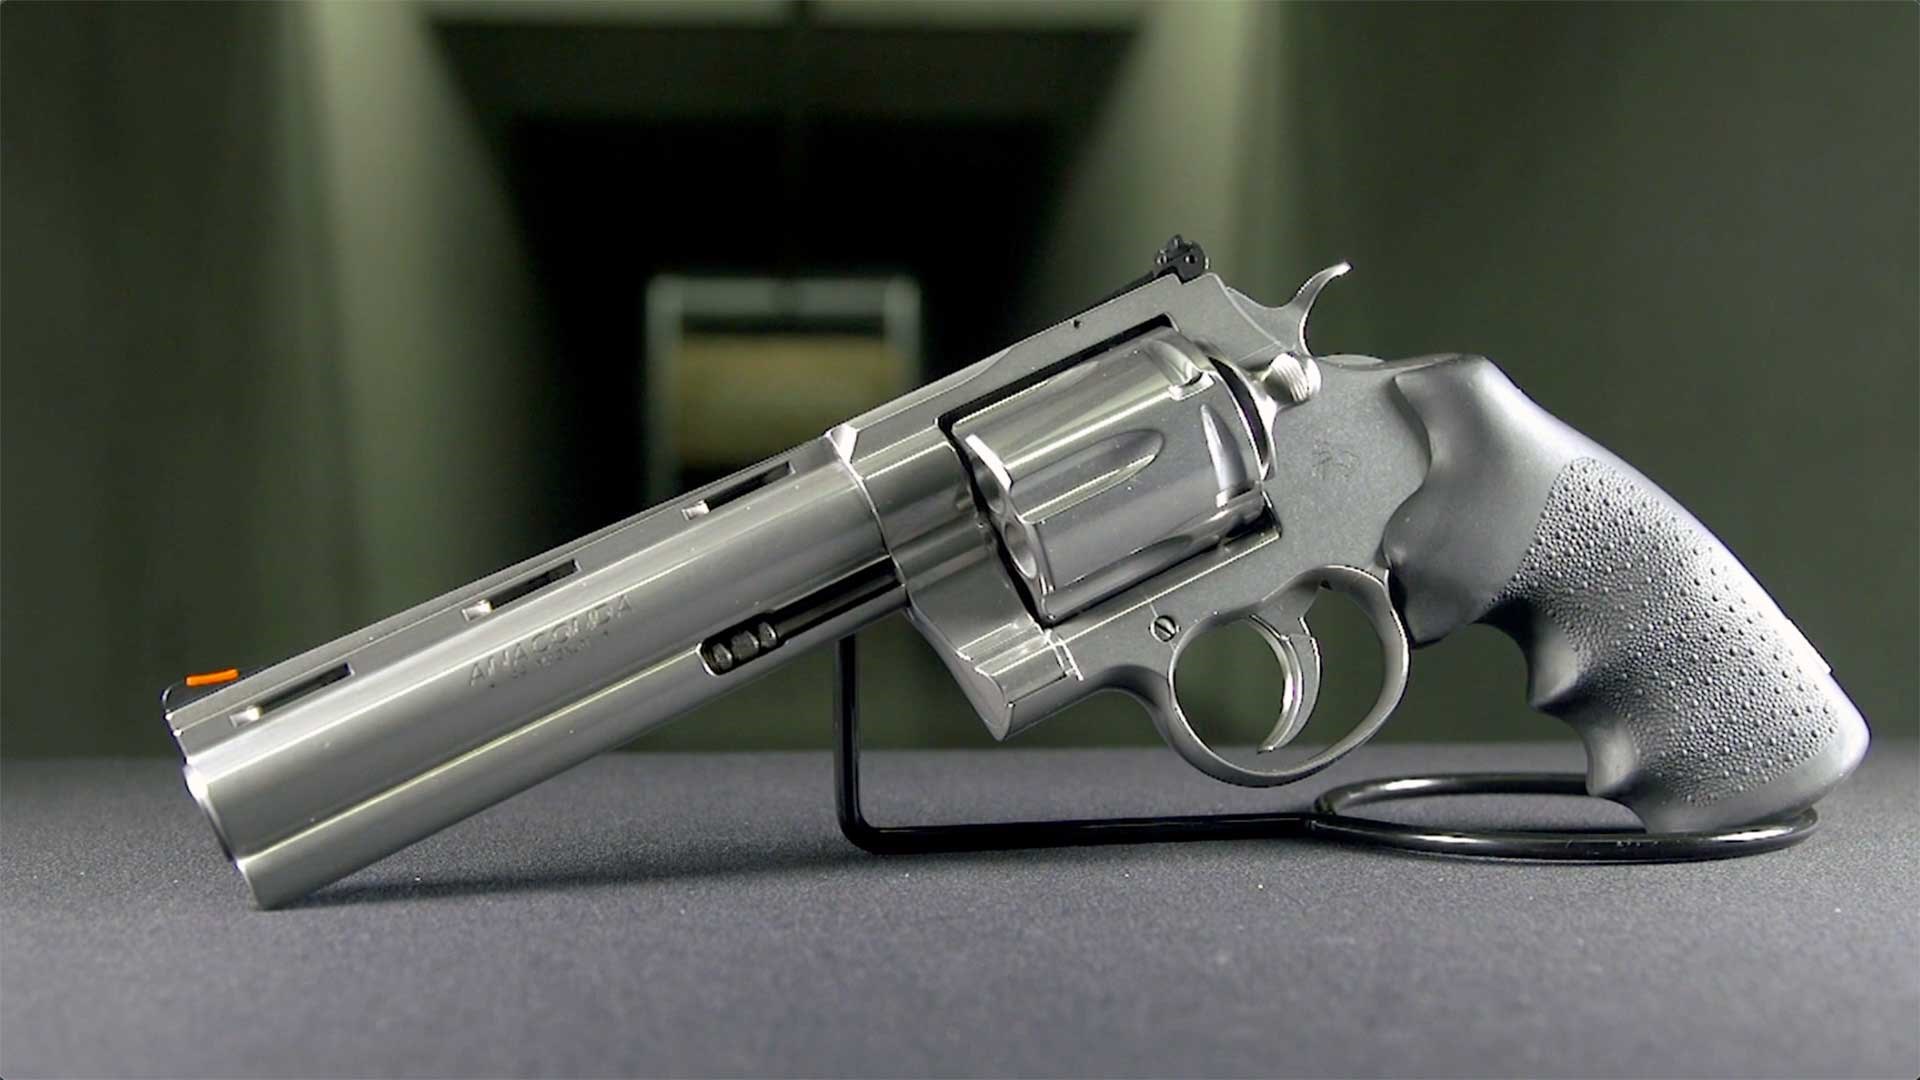 Left side of the Colt Anaconda .44 Mag. revolver shown with a dark range target in the background.